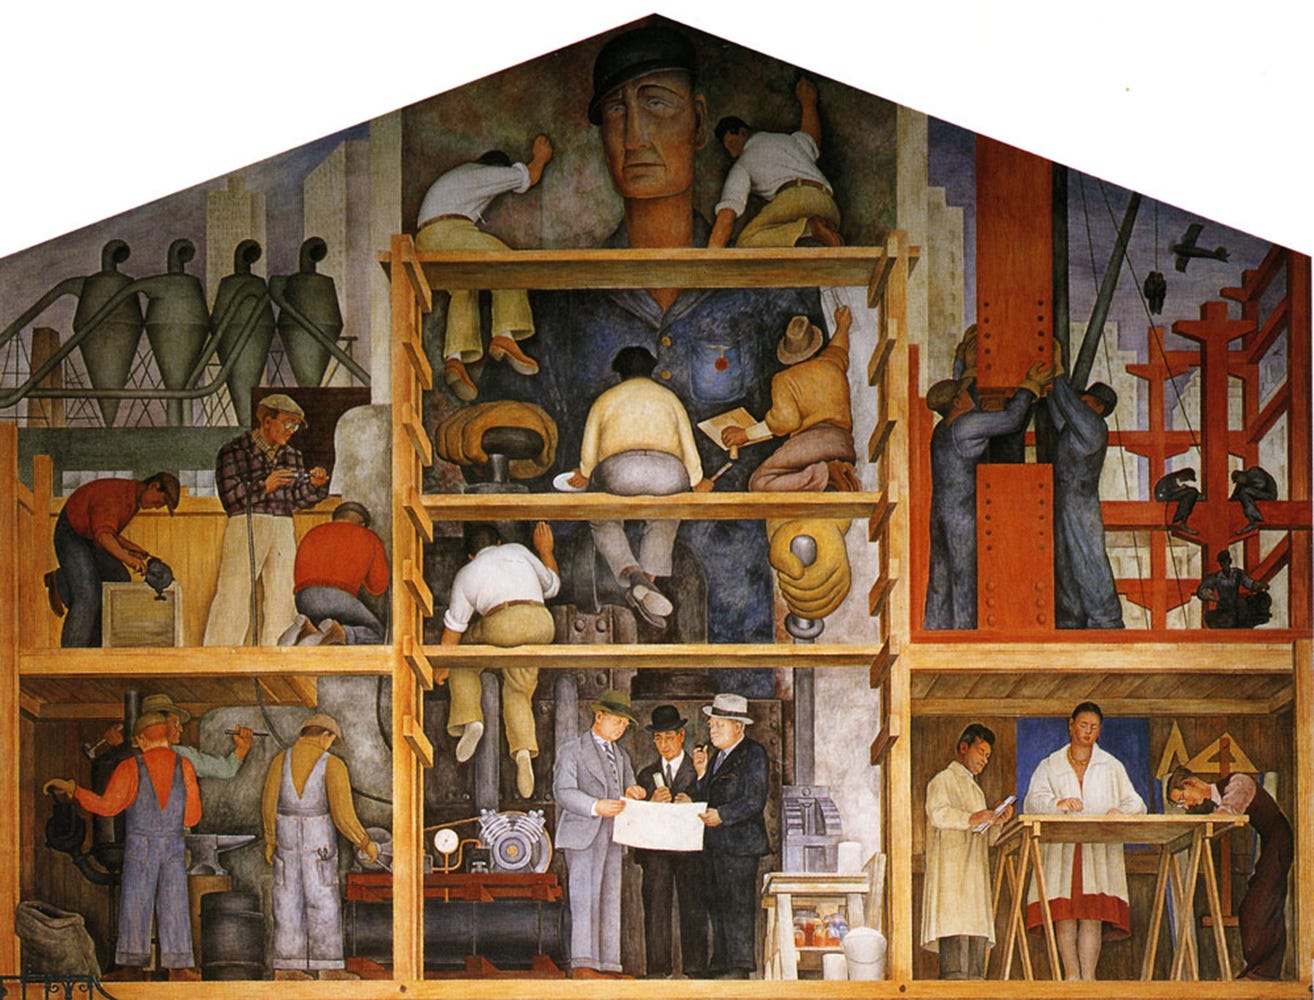 The Making of a Fresco Showing the Building of a City [Diego Rivera] |  Sartle - Rogue Art History